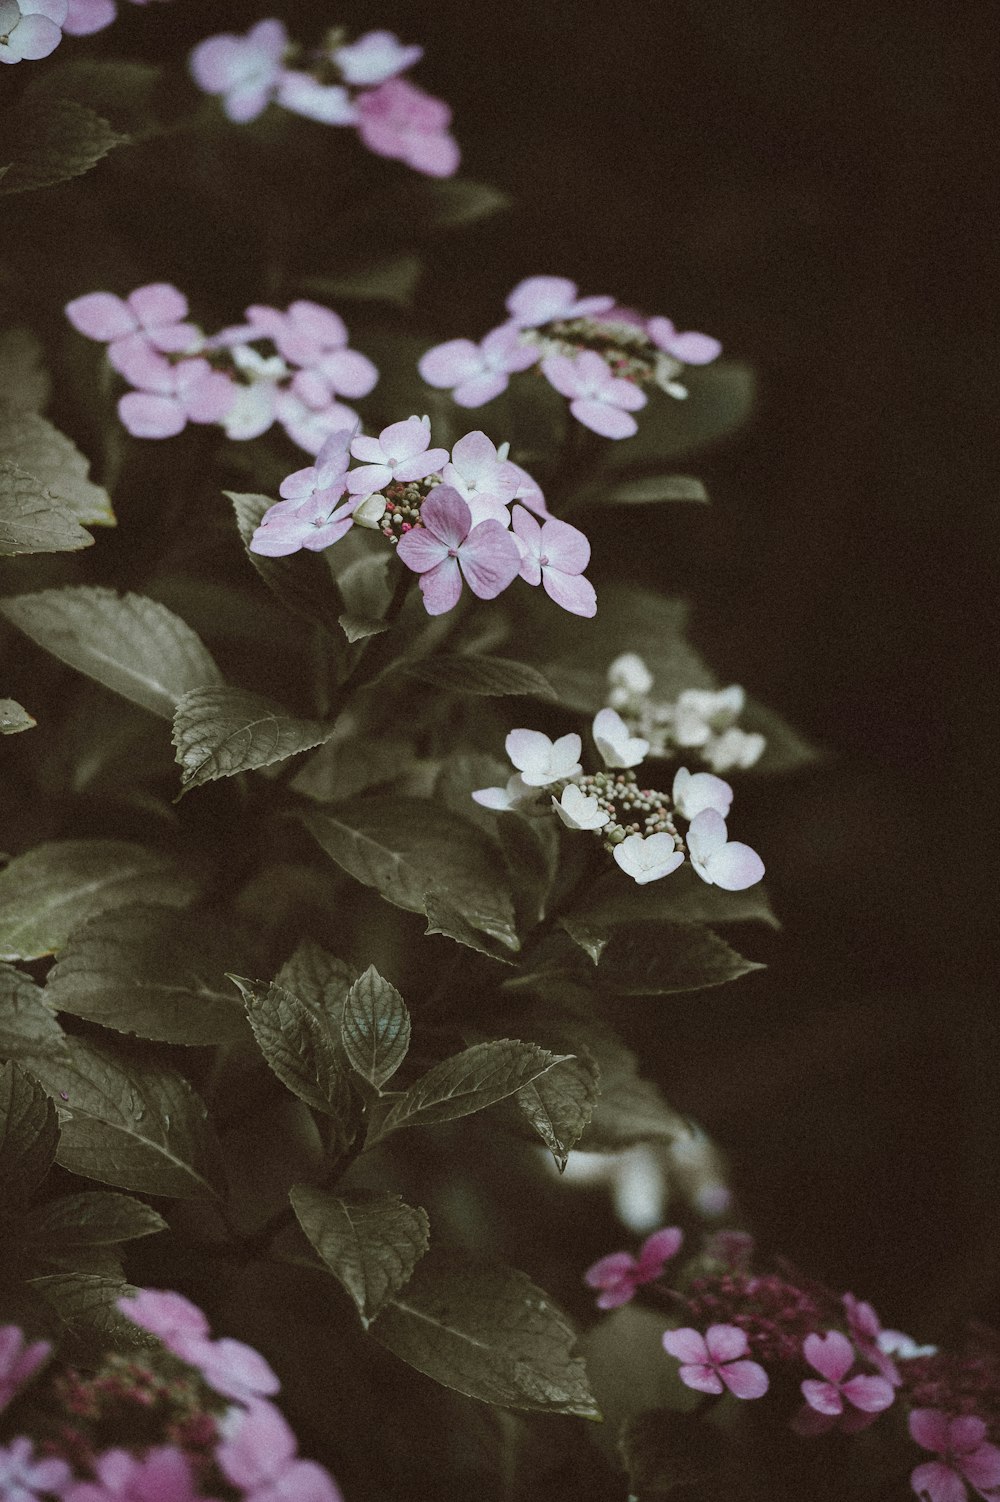 purple and white flowers surrounded by leaves